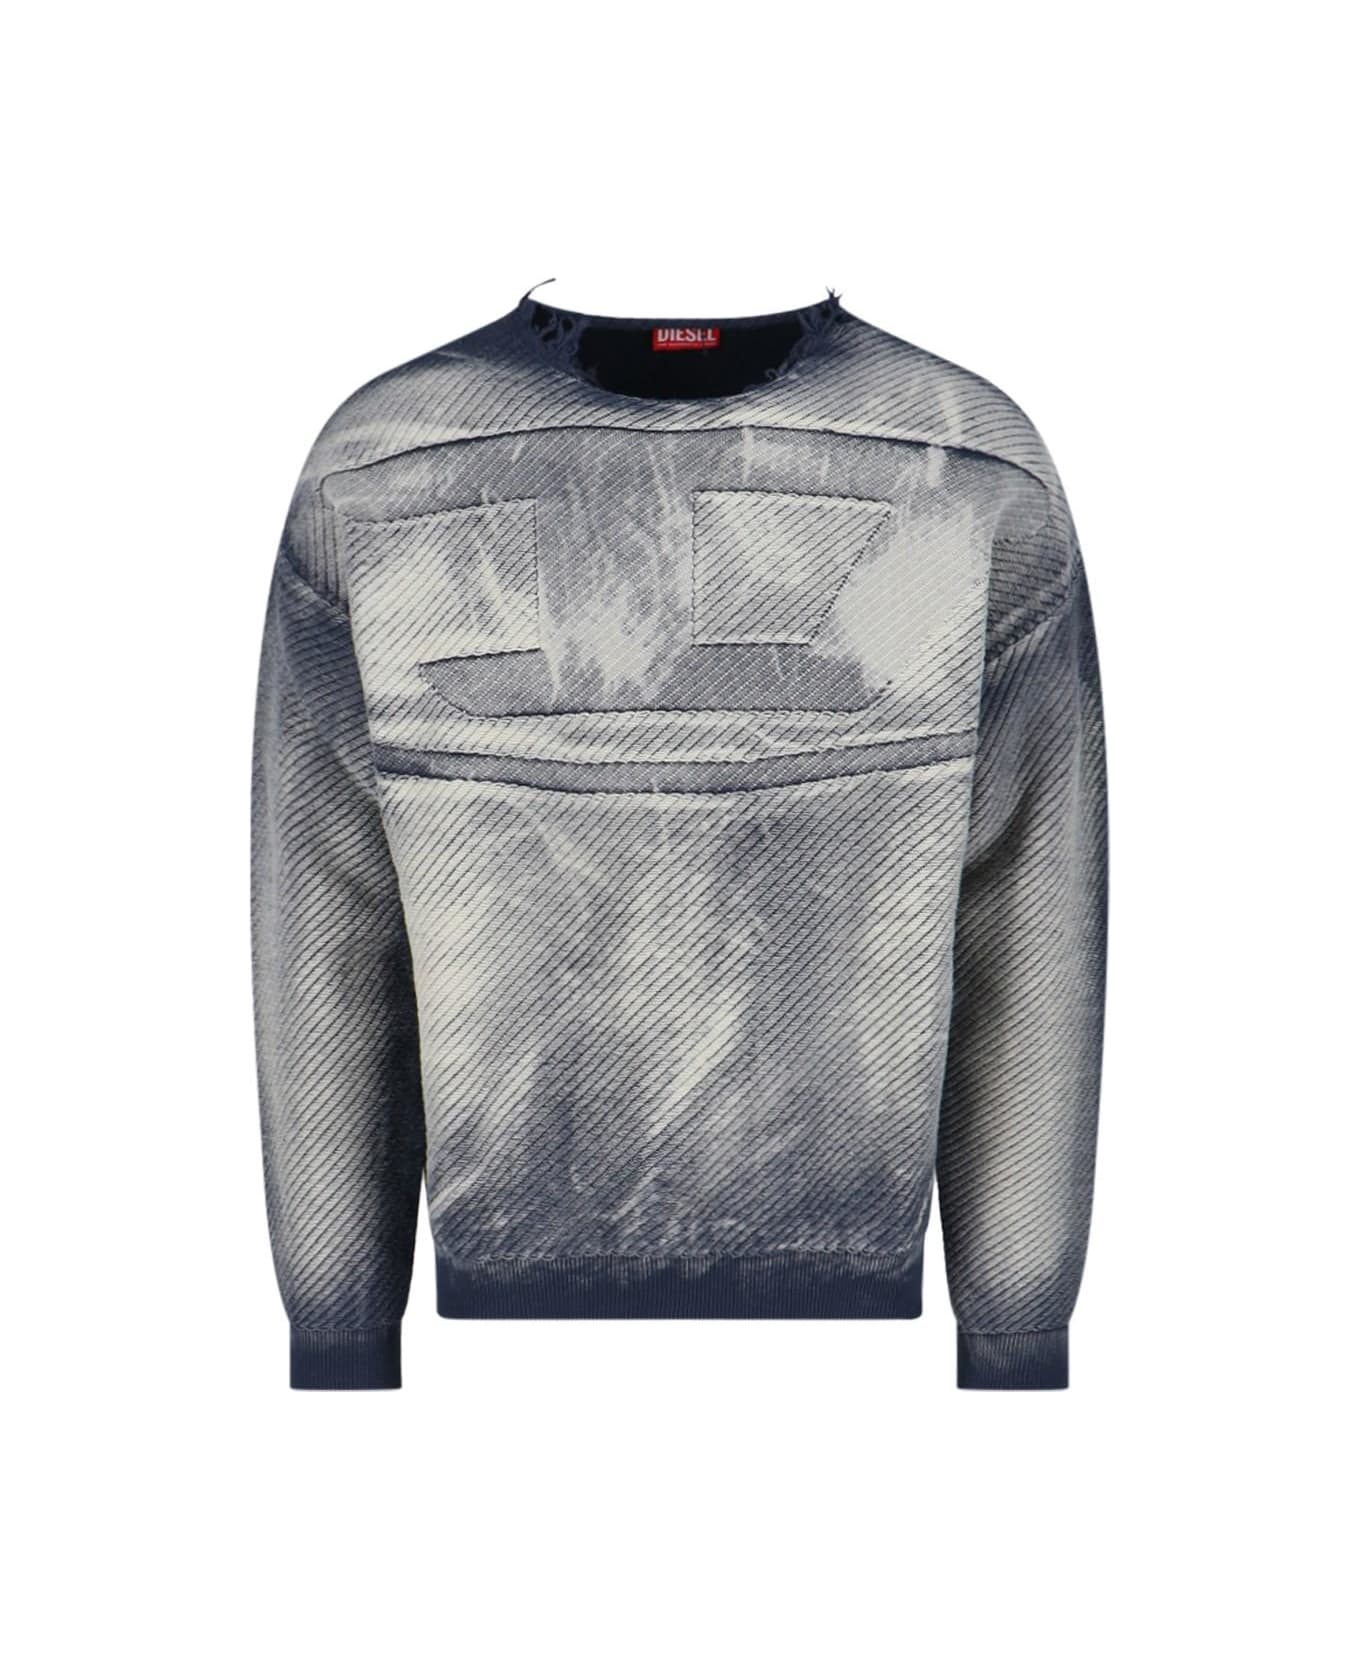 Diesel Frayed Sweater - At